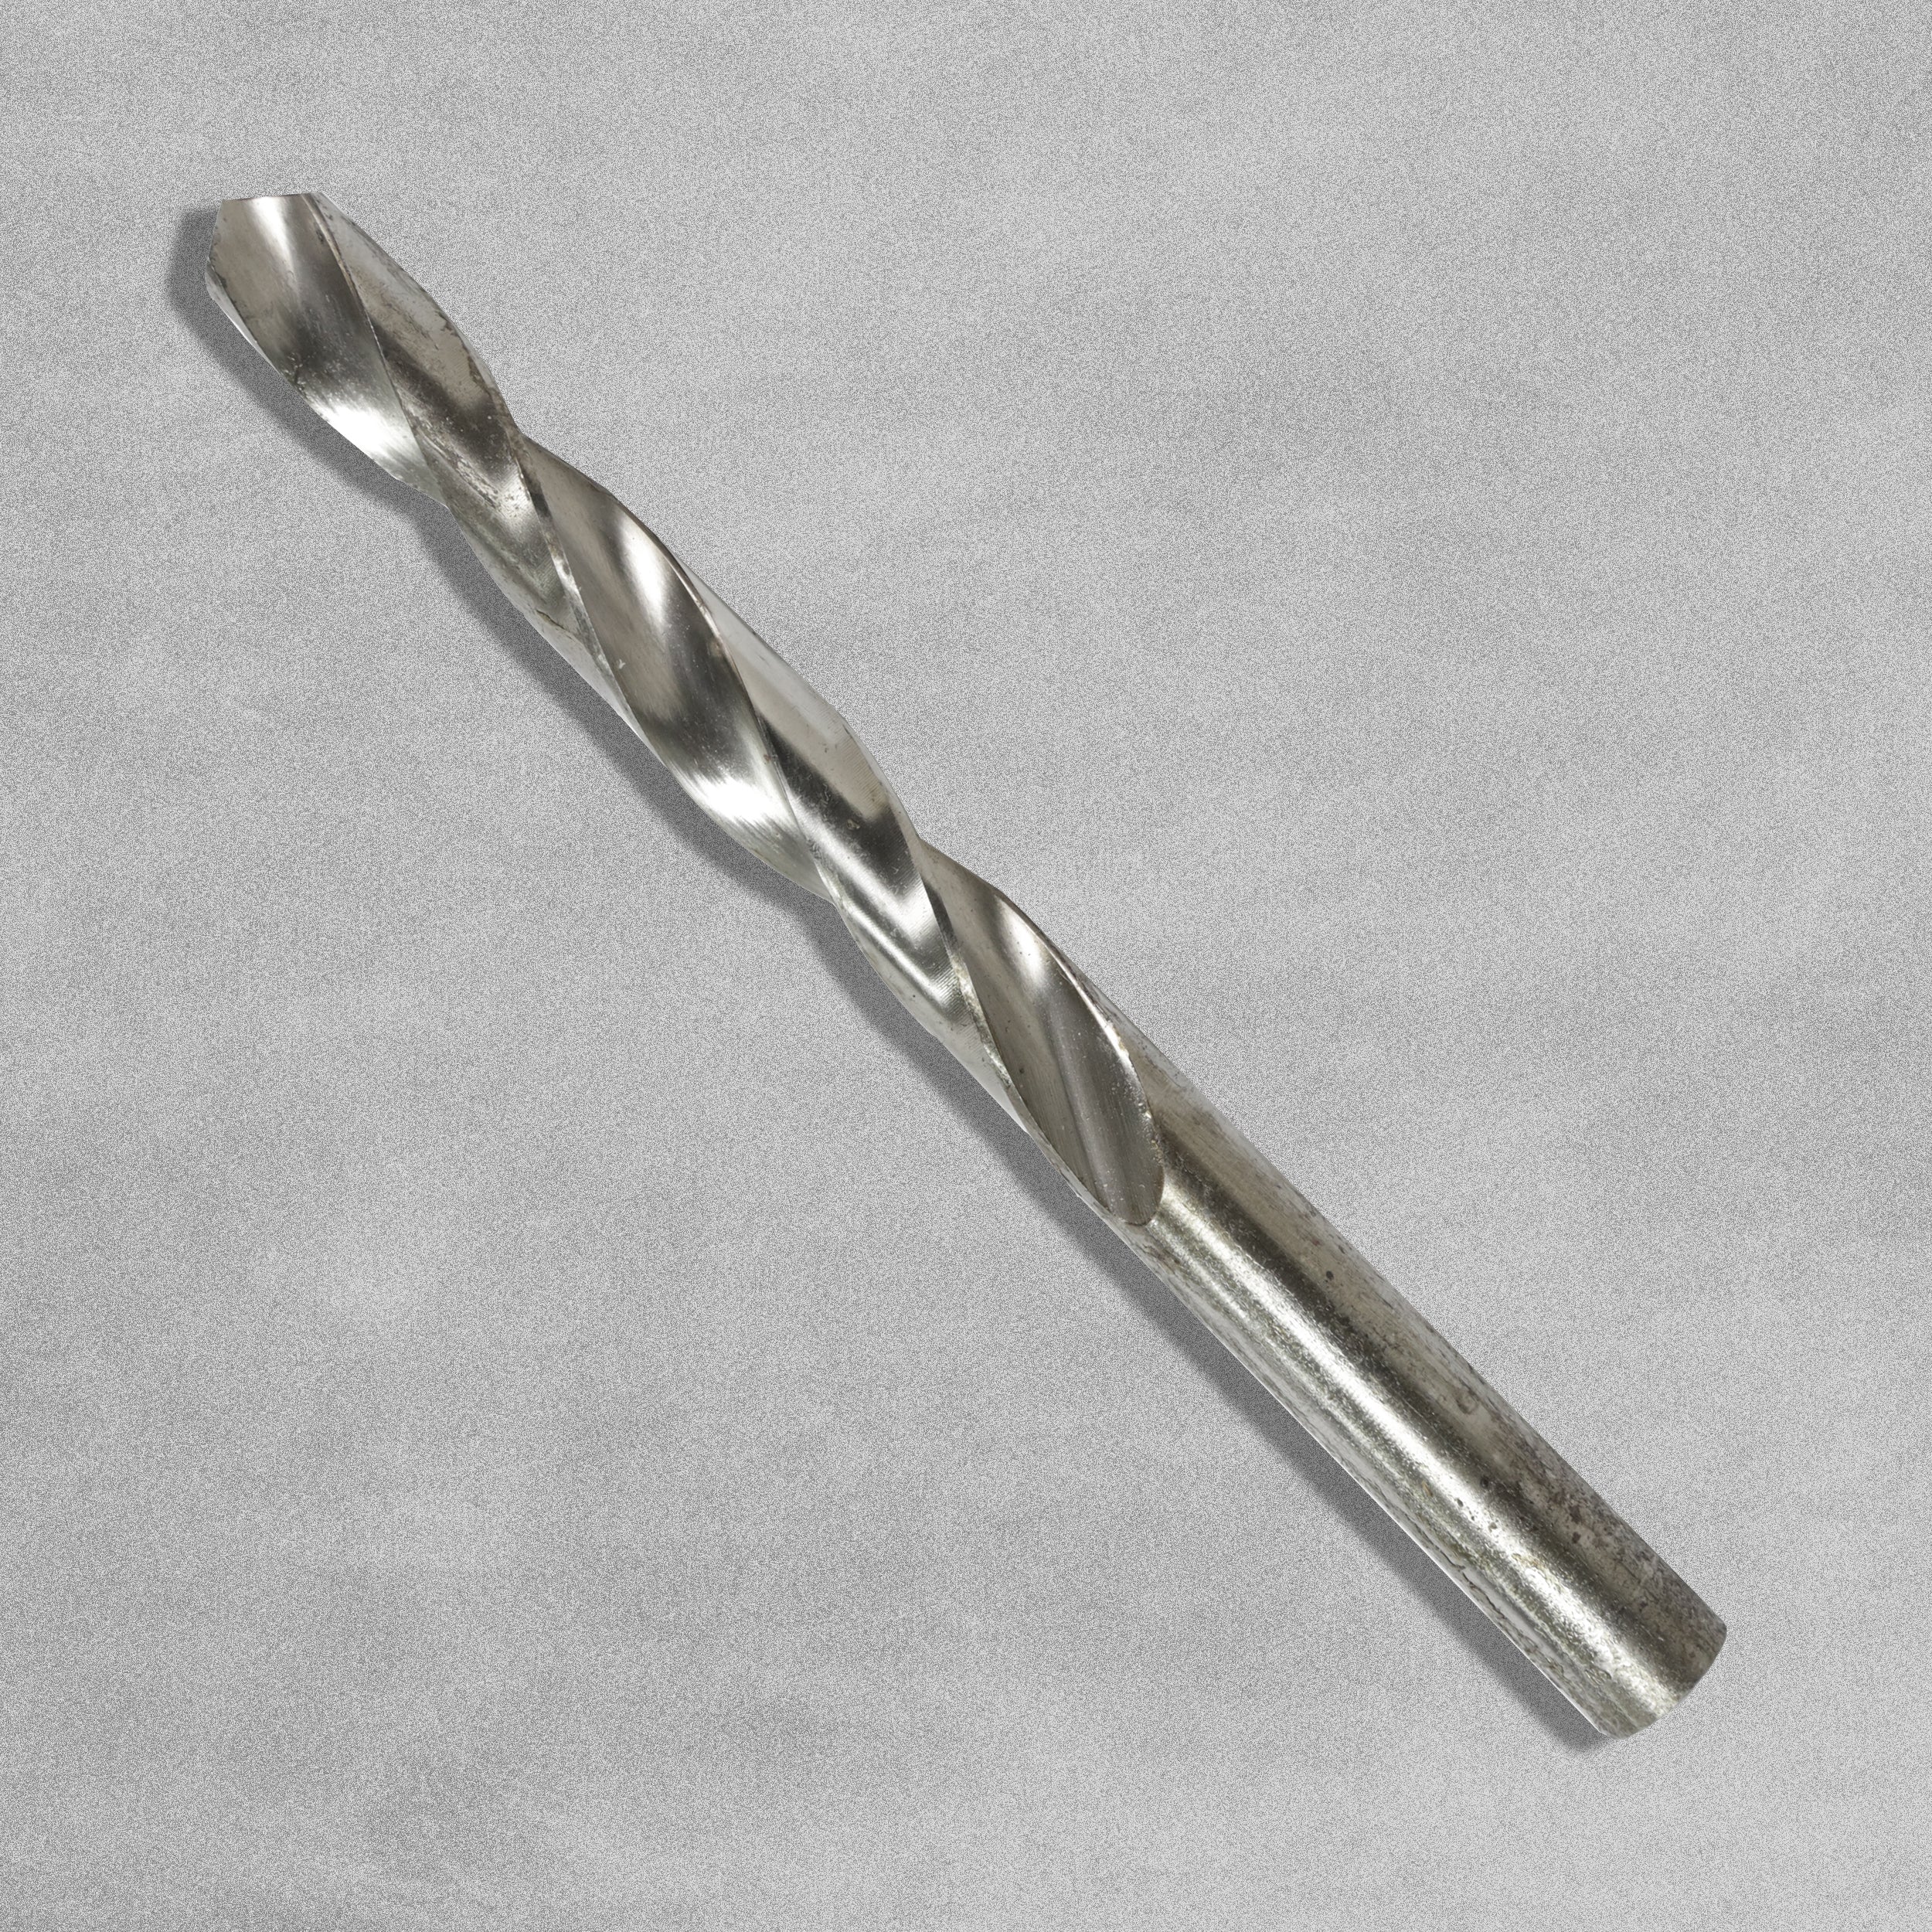 HSS-G Metal Drill Bit 11.25mm by BBW Germany, sold by In-Excess